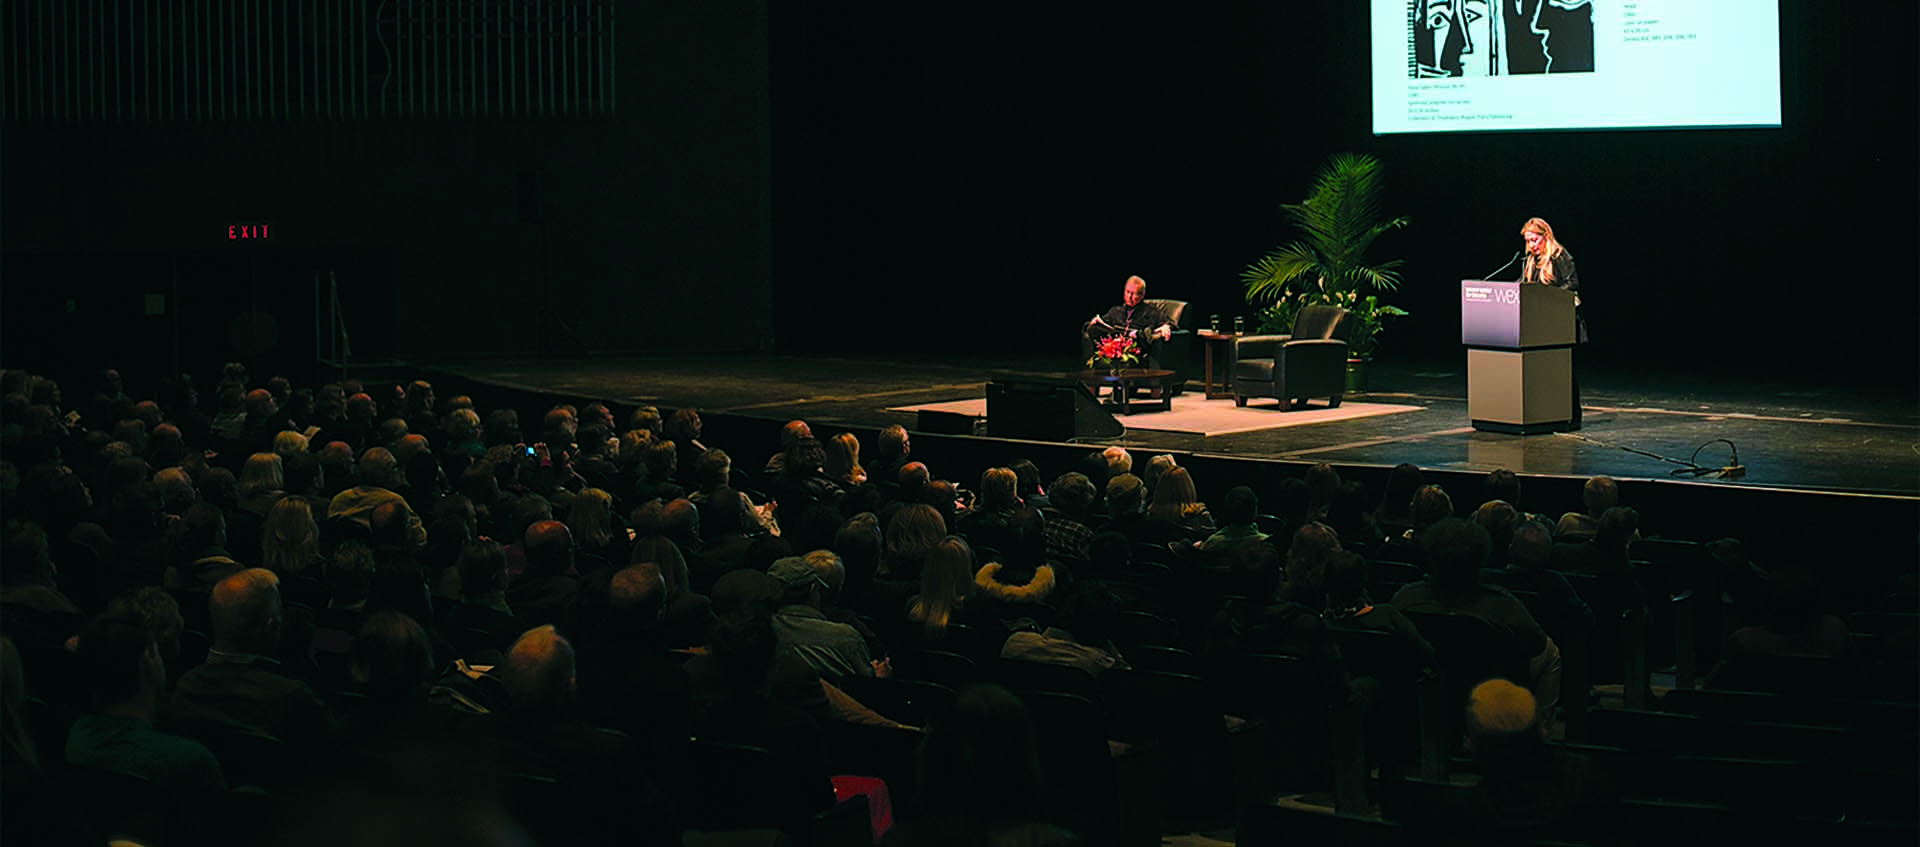 Conversation between Diana Widmaier Picasso and Jack Cowart on stage